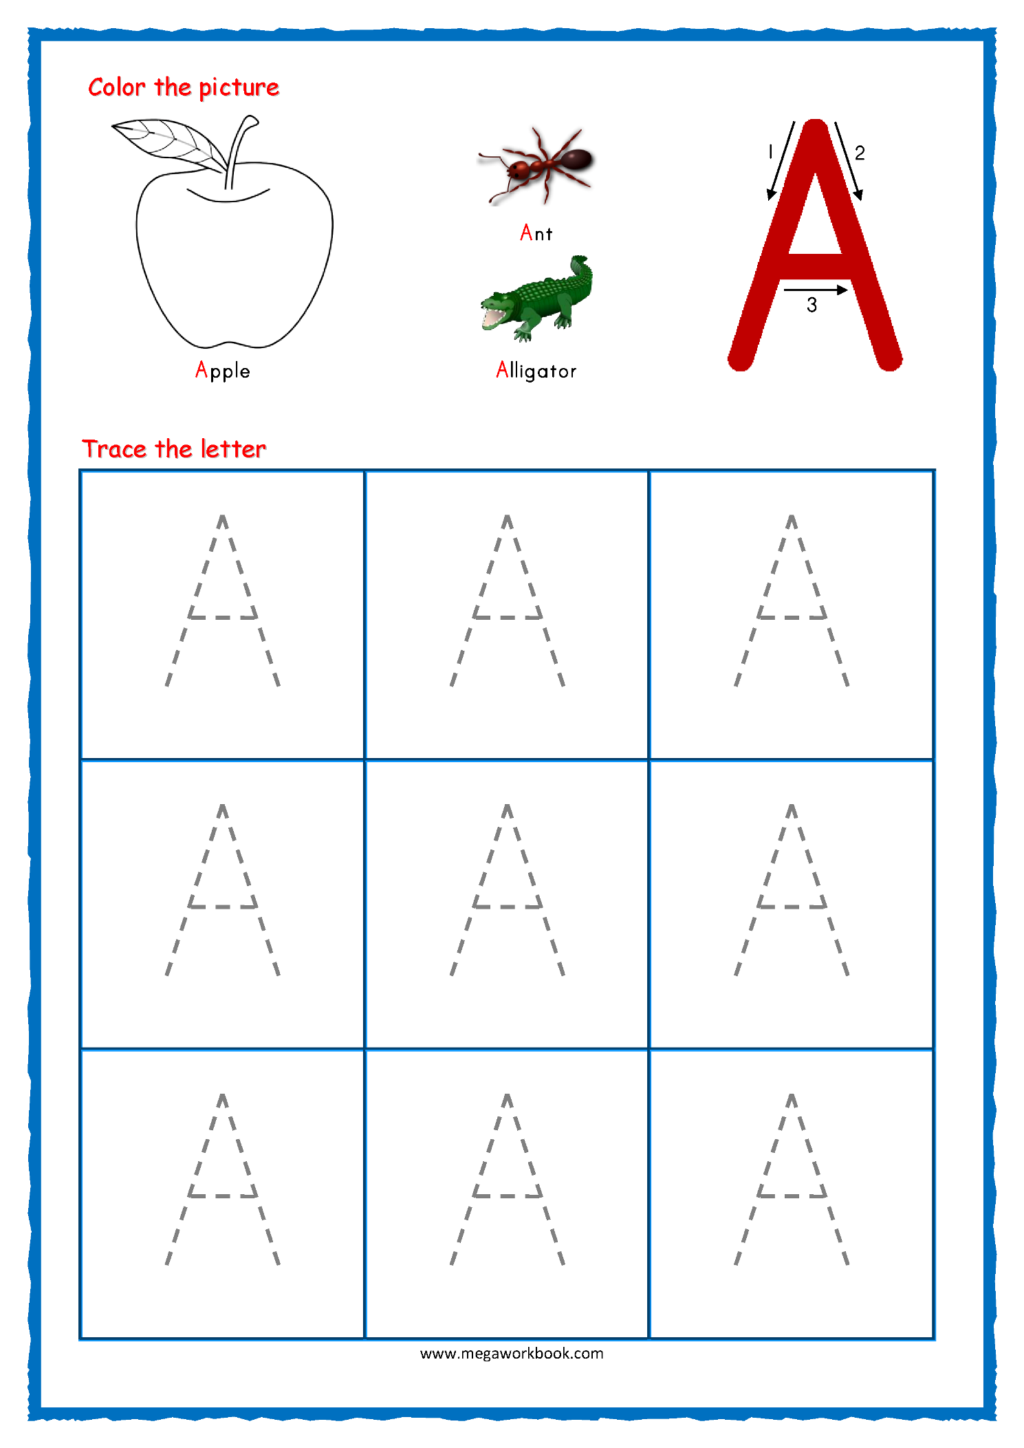 Worksheet ~ Capital Letter Tracing With Crayons 01 Alphabet